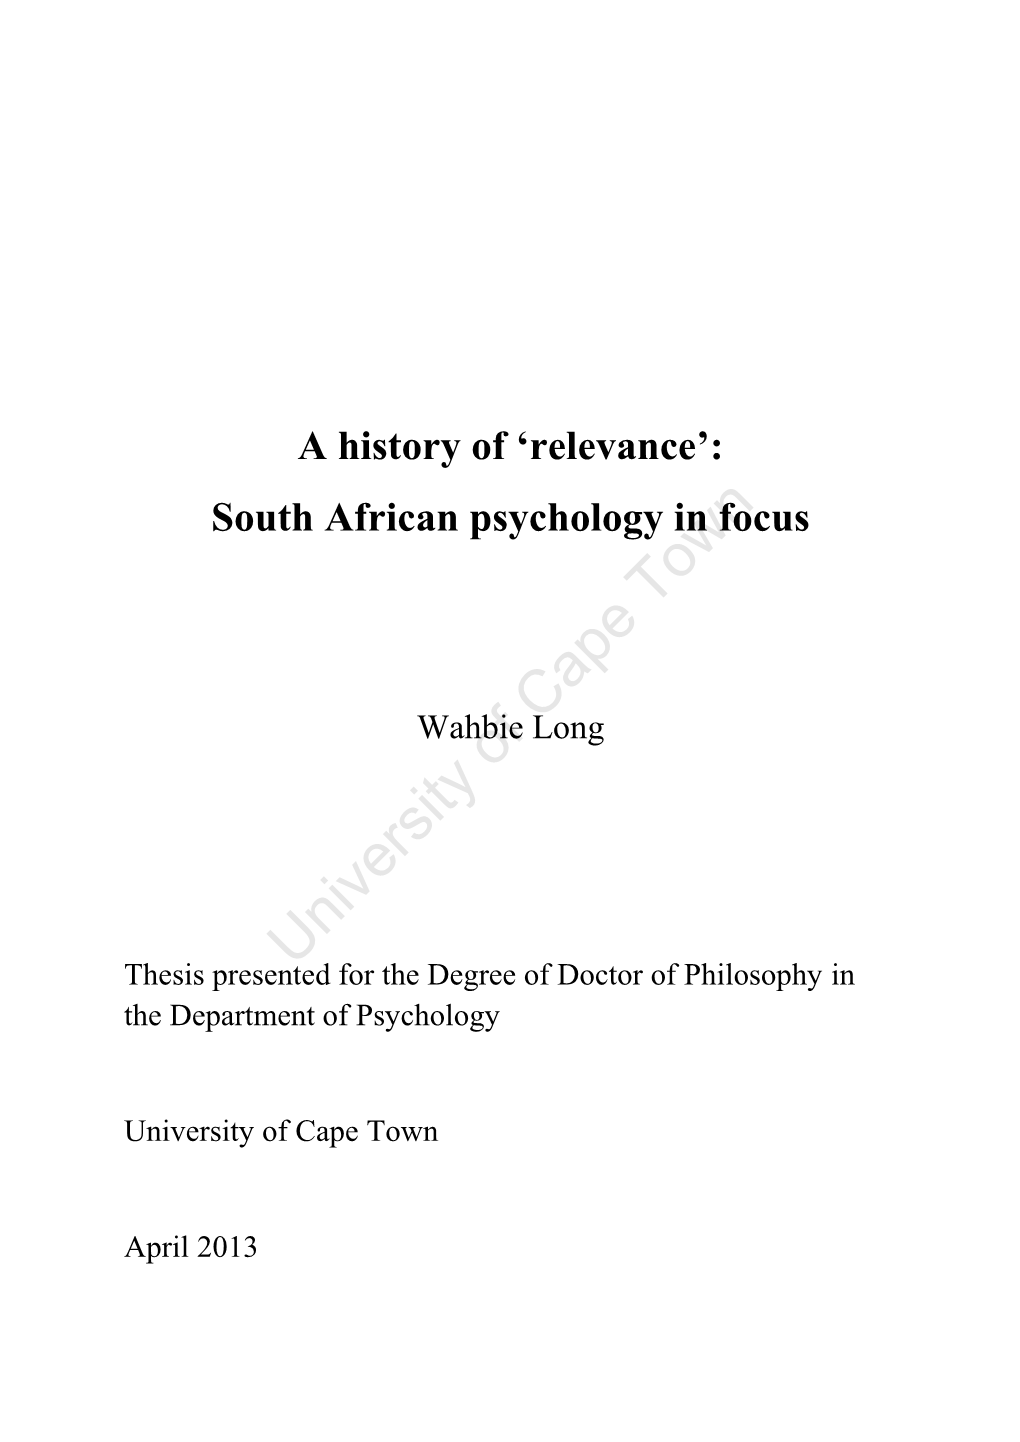 Relevance': South African Psychology in Focus